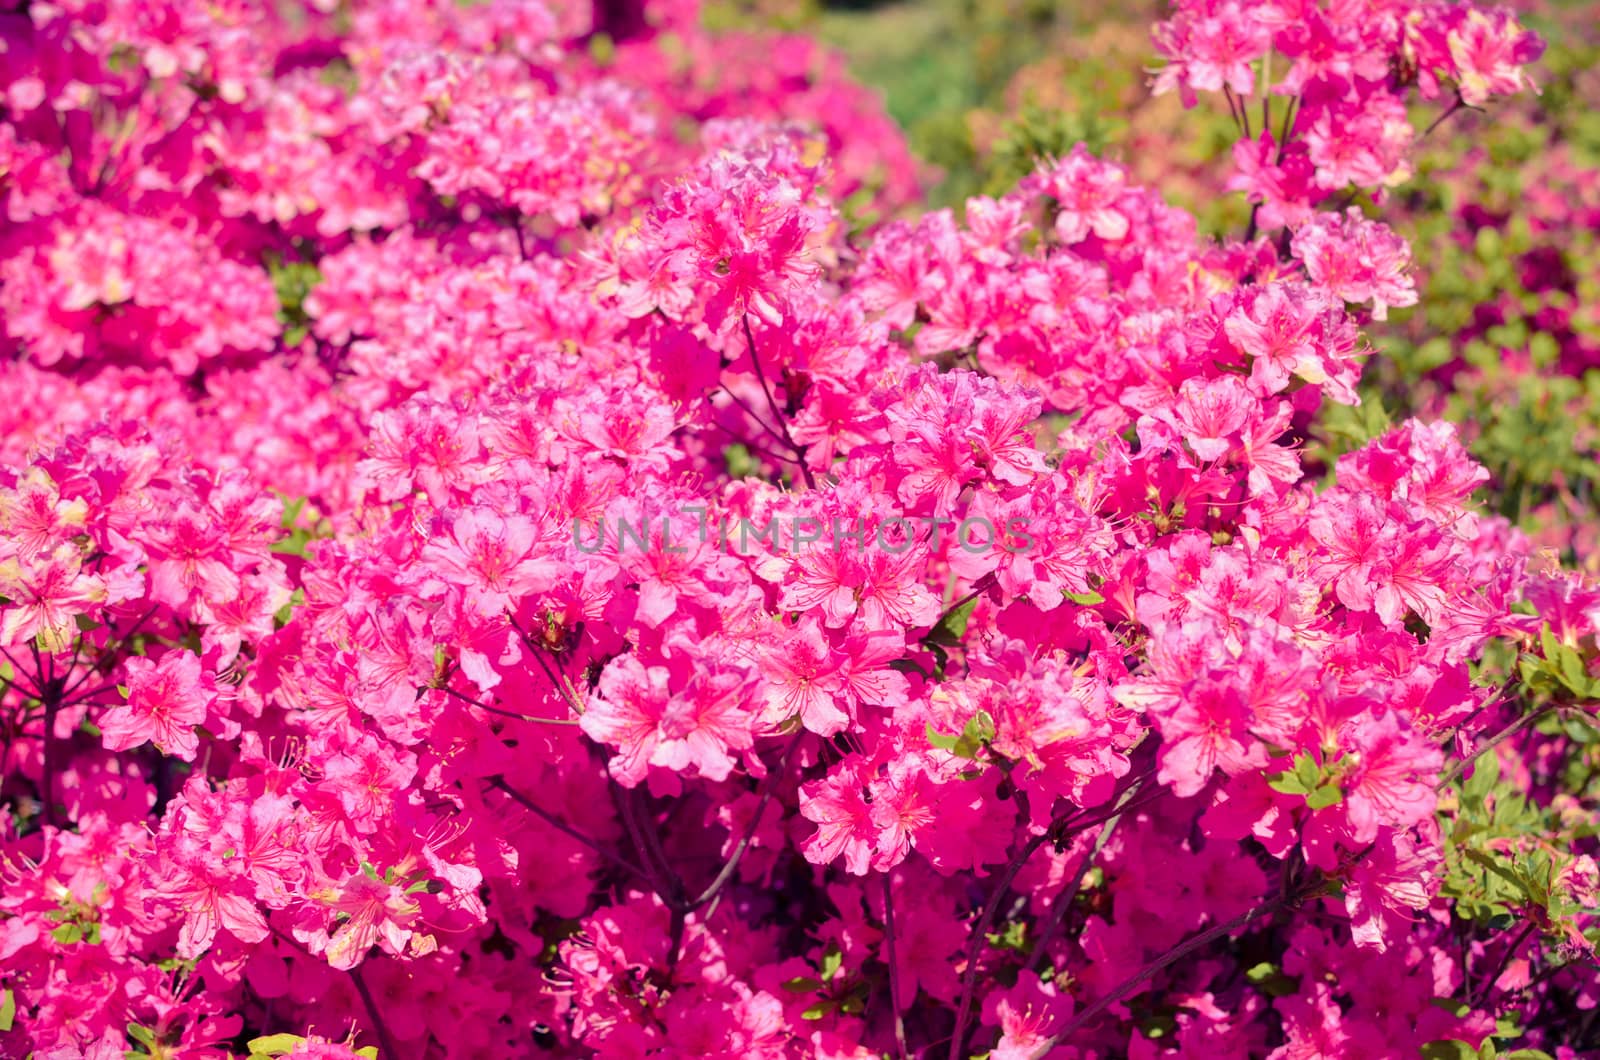 Blooming meadow with pink flowers of rhododendron bushes by kimbo-bo